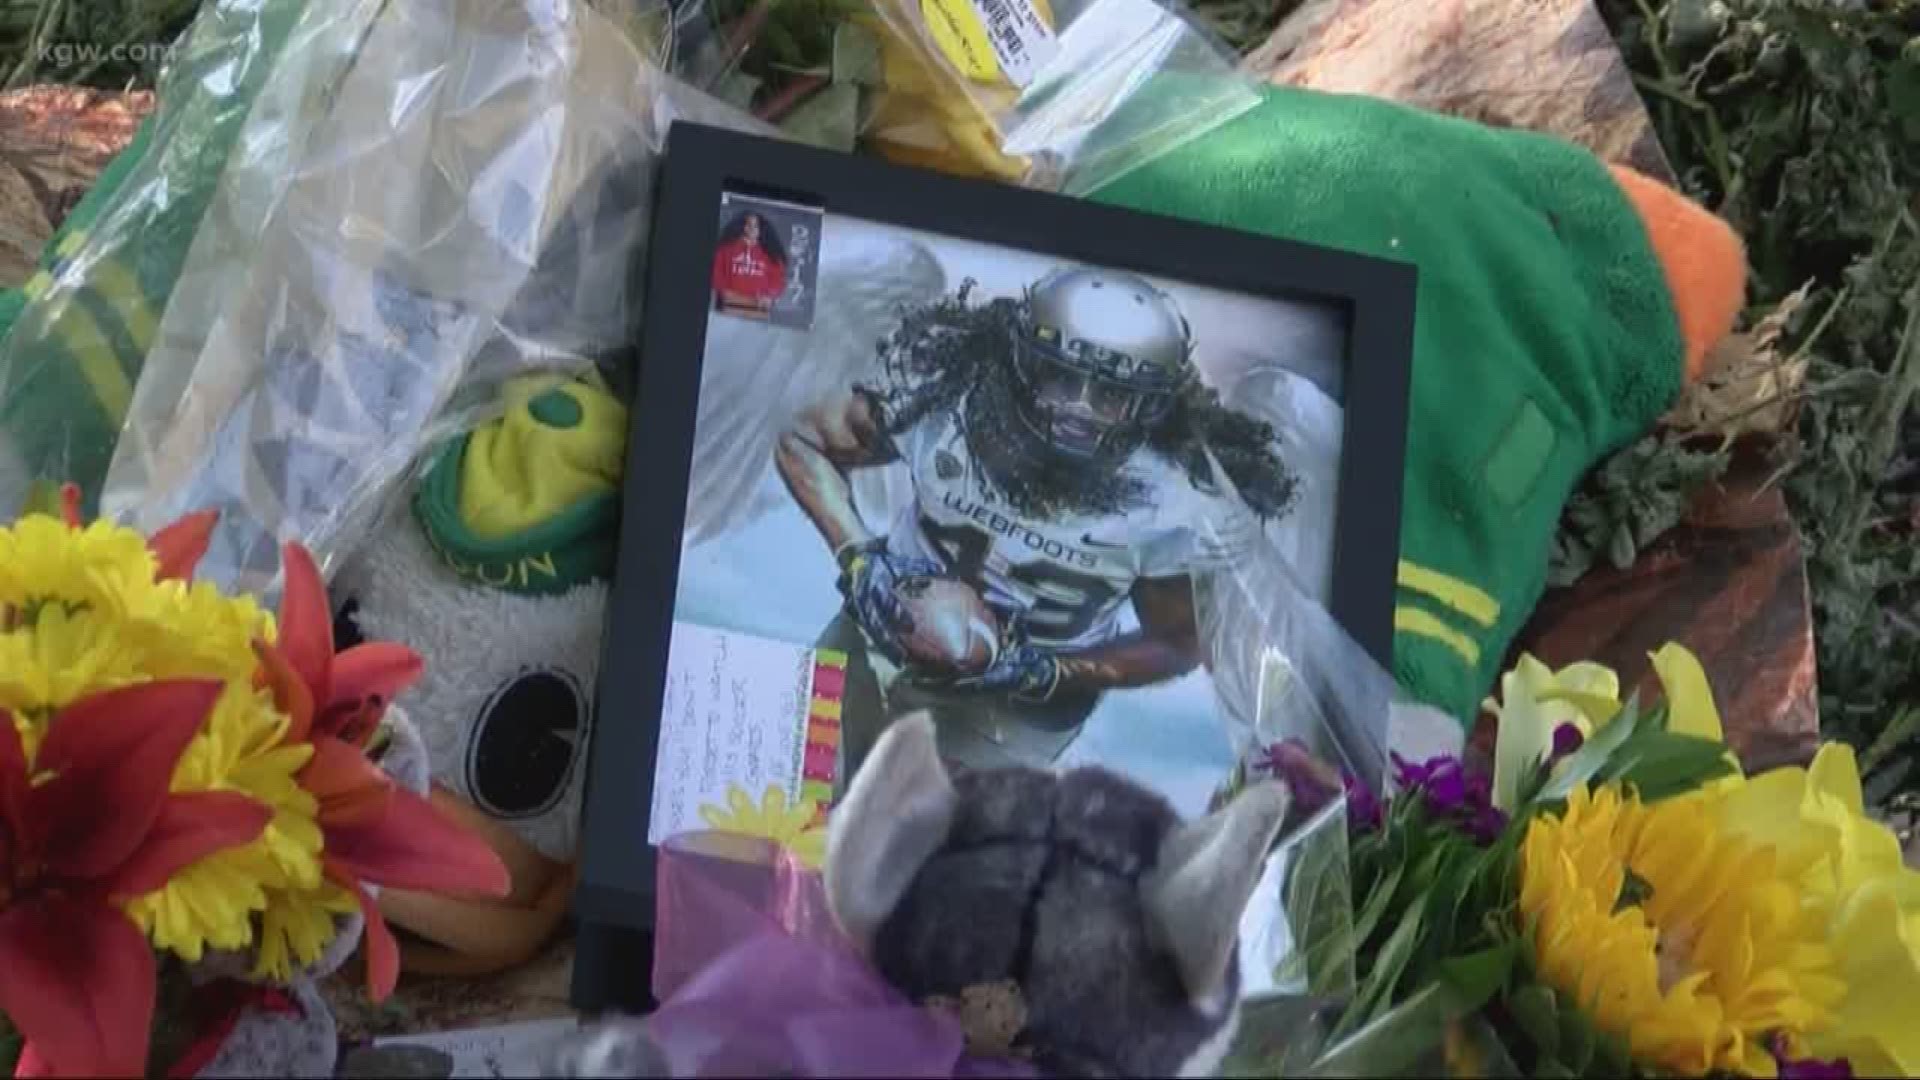 'He will be remembered and missed by all': Oregon AD, coach react to death of former player